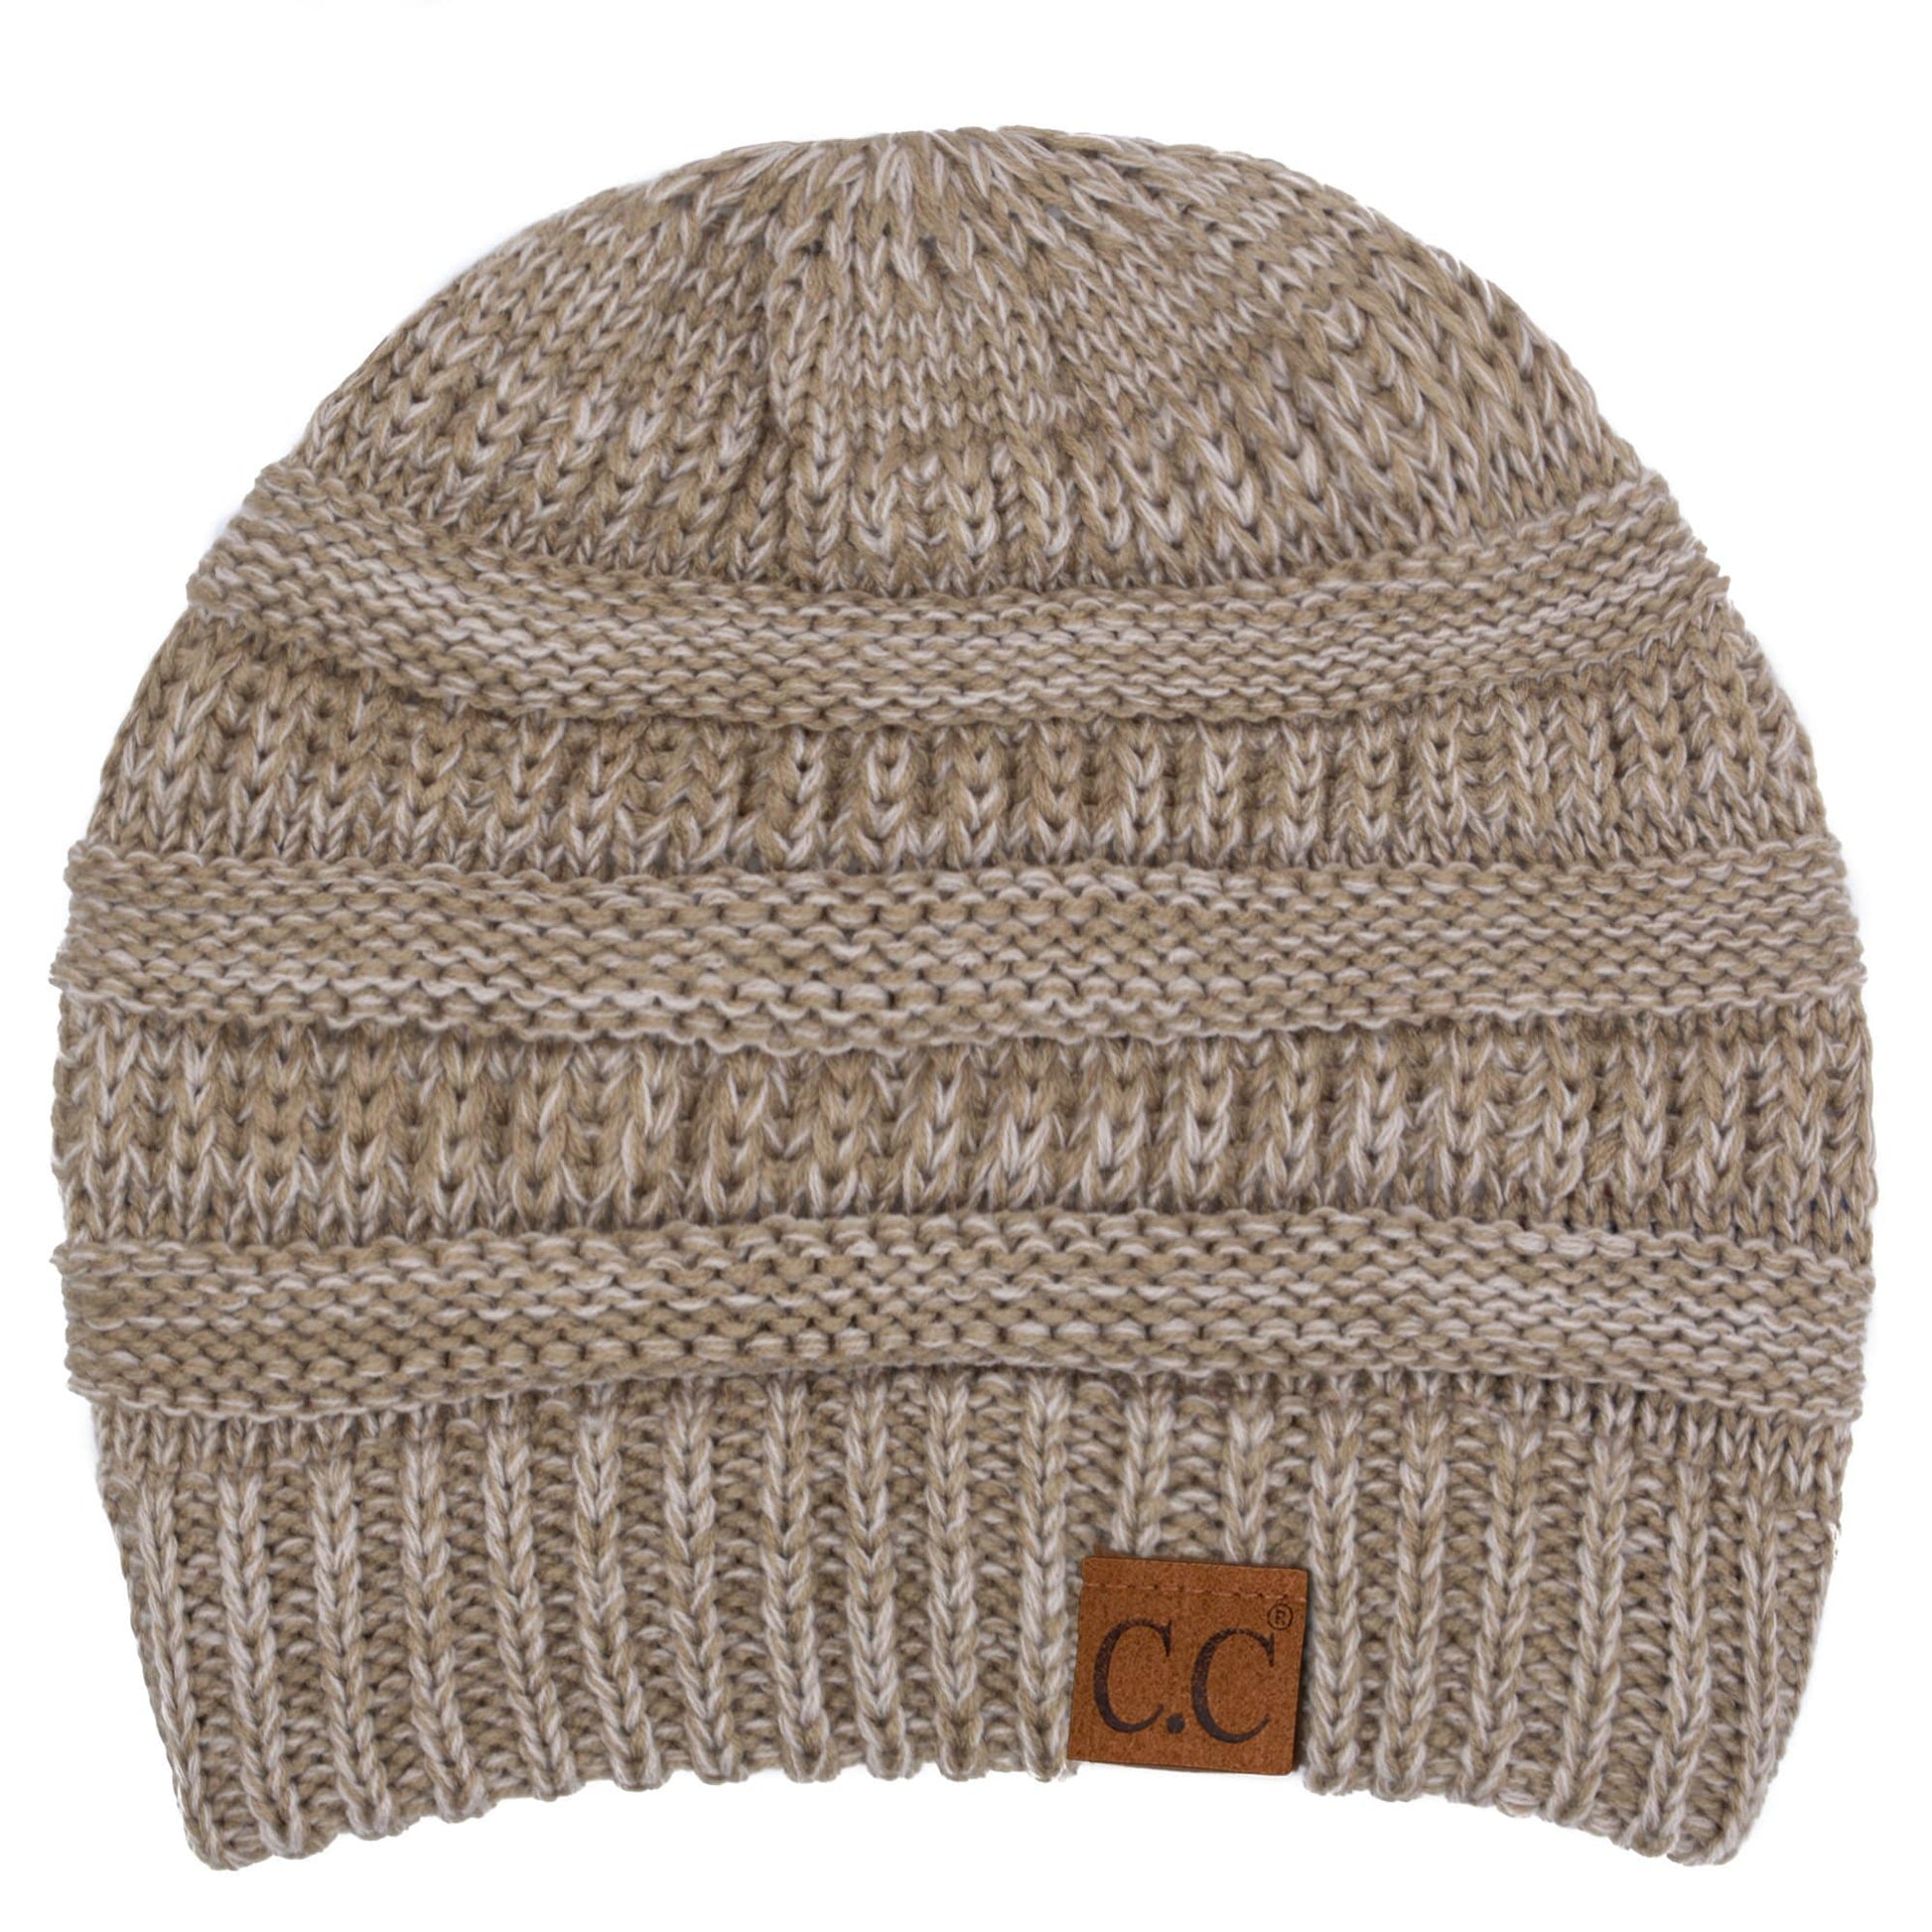 C.C Apparel Two Tone Taupe C.C Trendy Warm Chunky Soft Stretch Two-Toned Cable Knit Beanie Skully